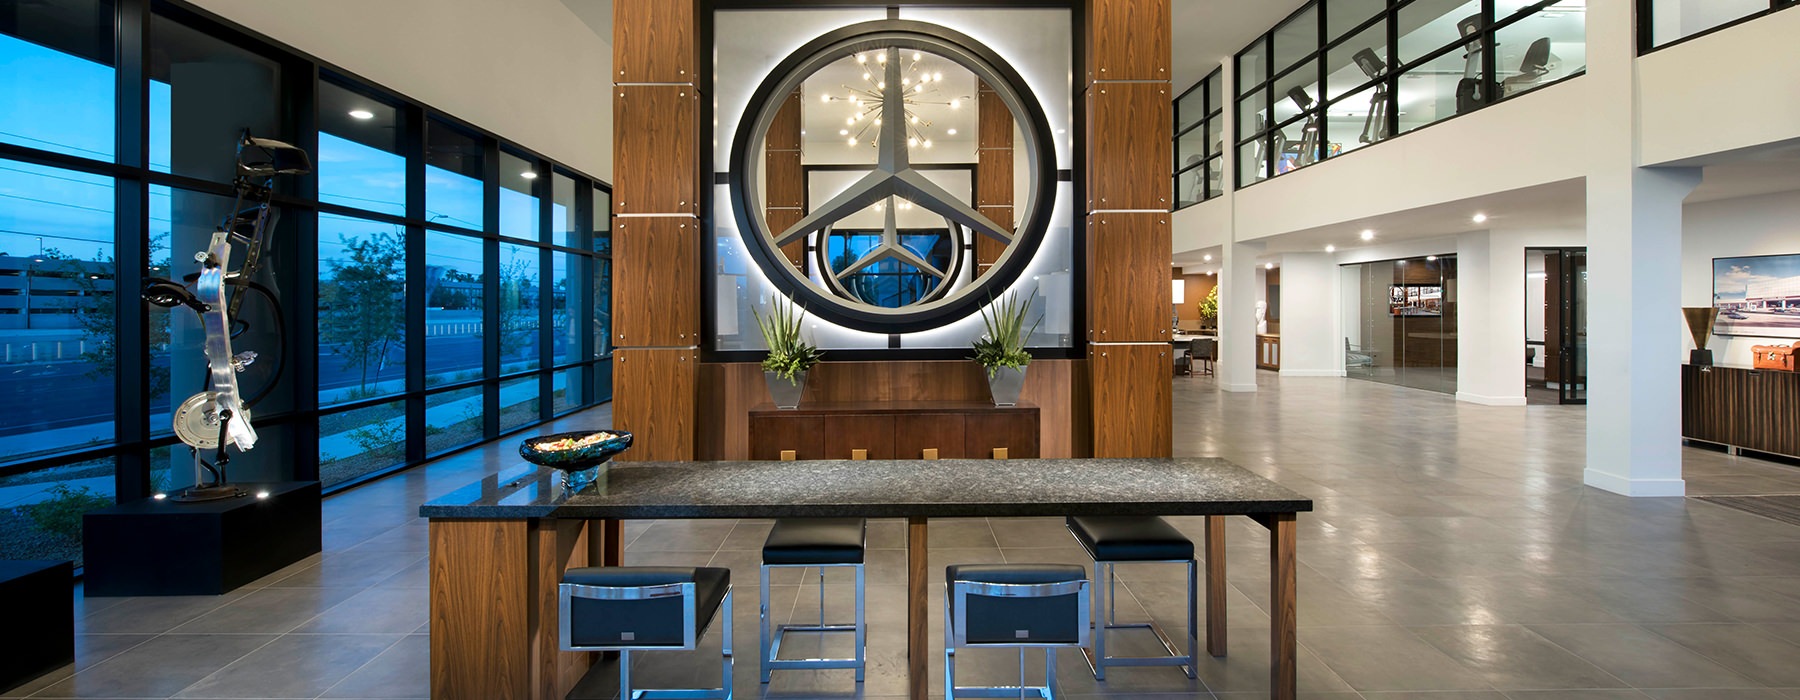 Open lobby with high ceilings and floor-to-ceiling windows